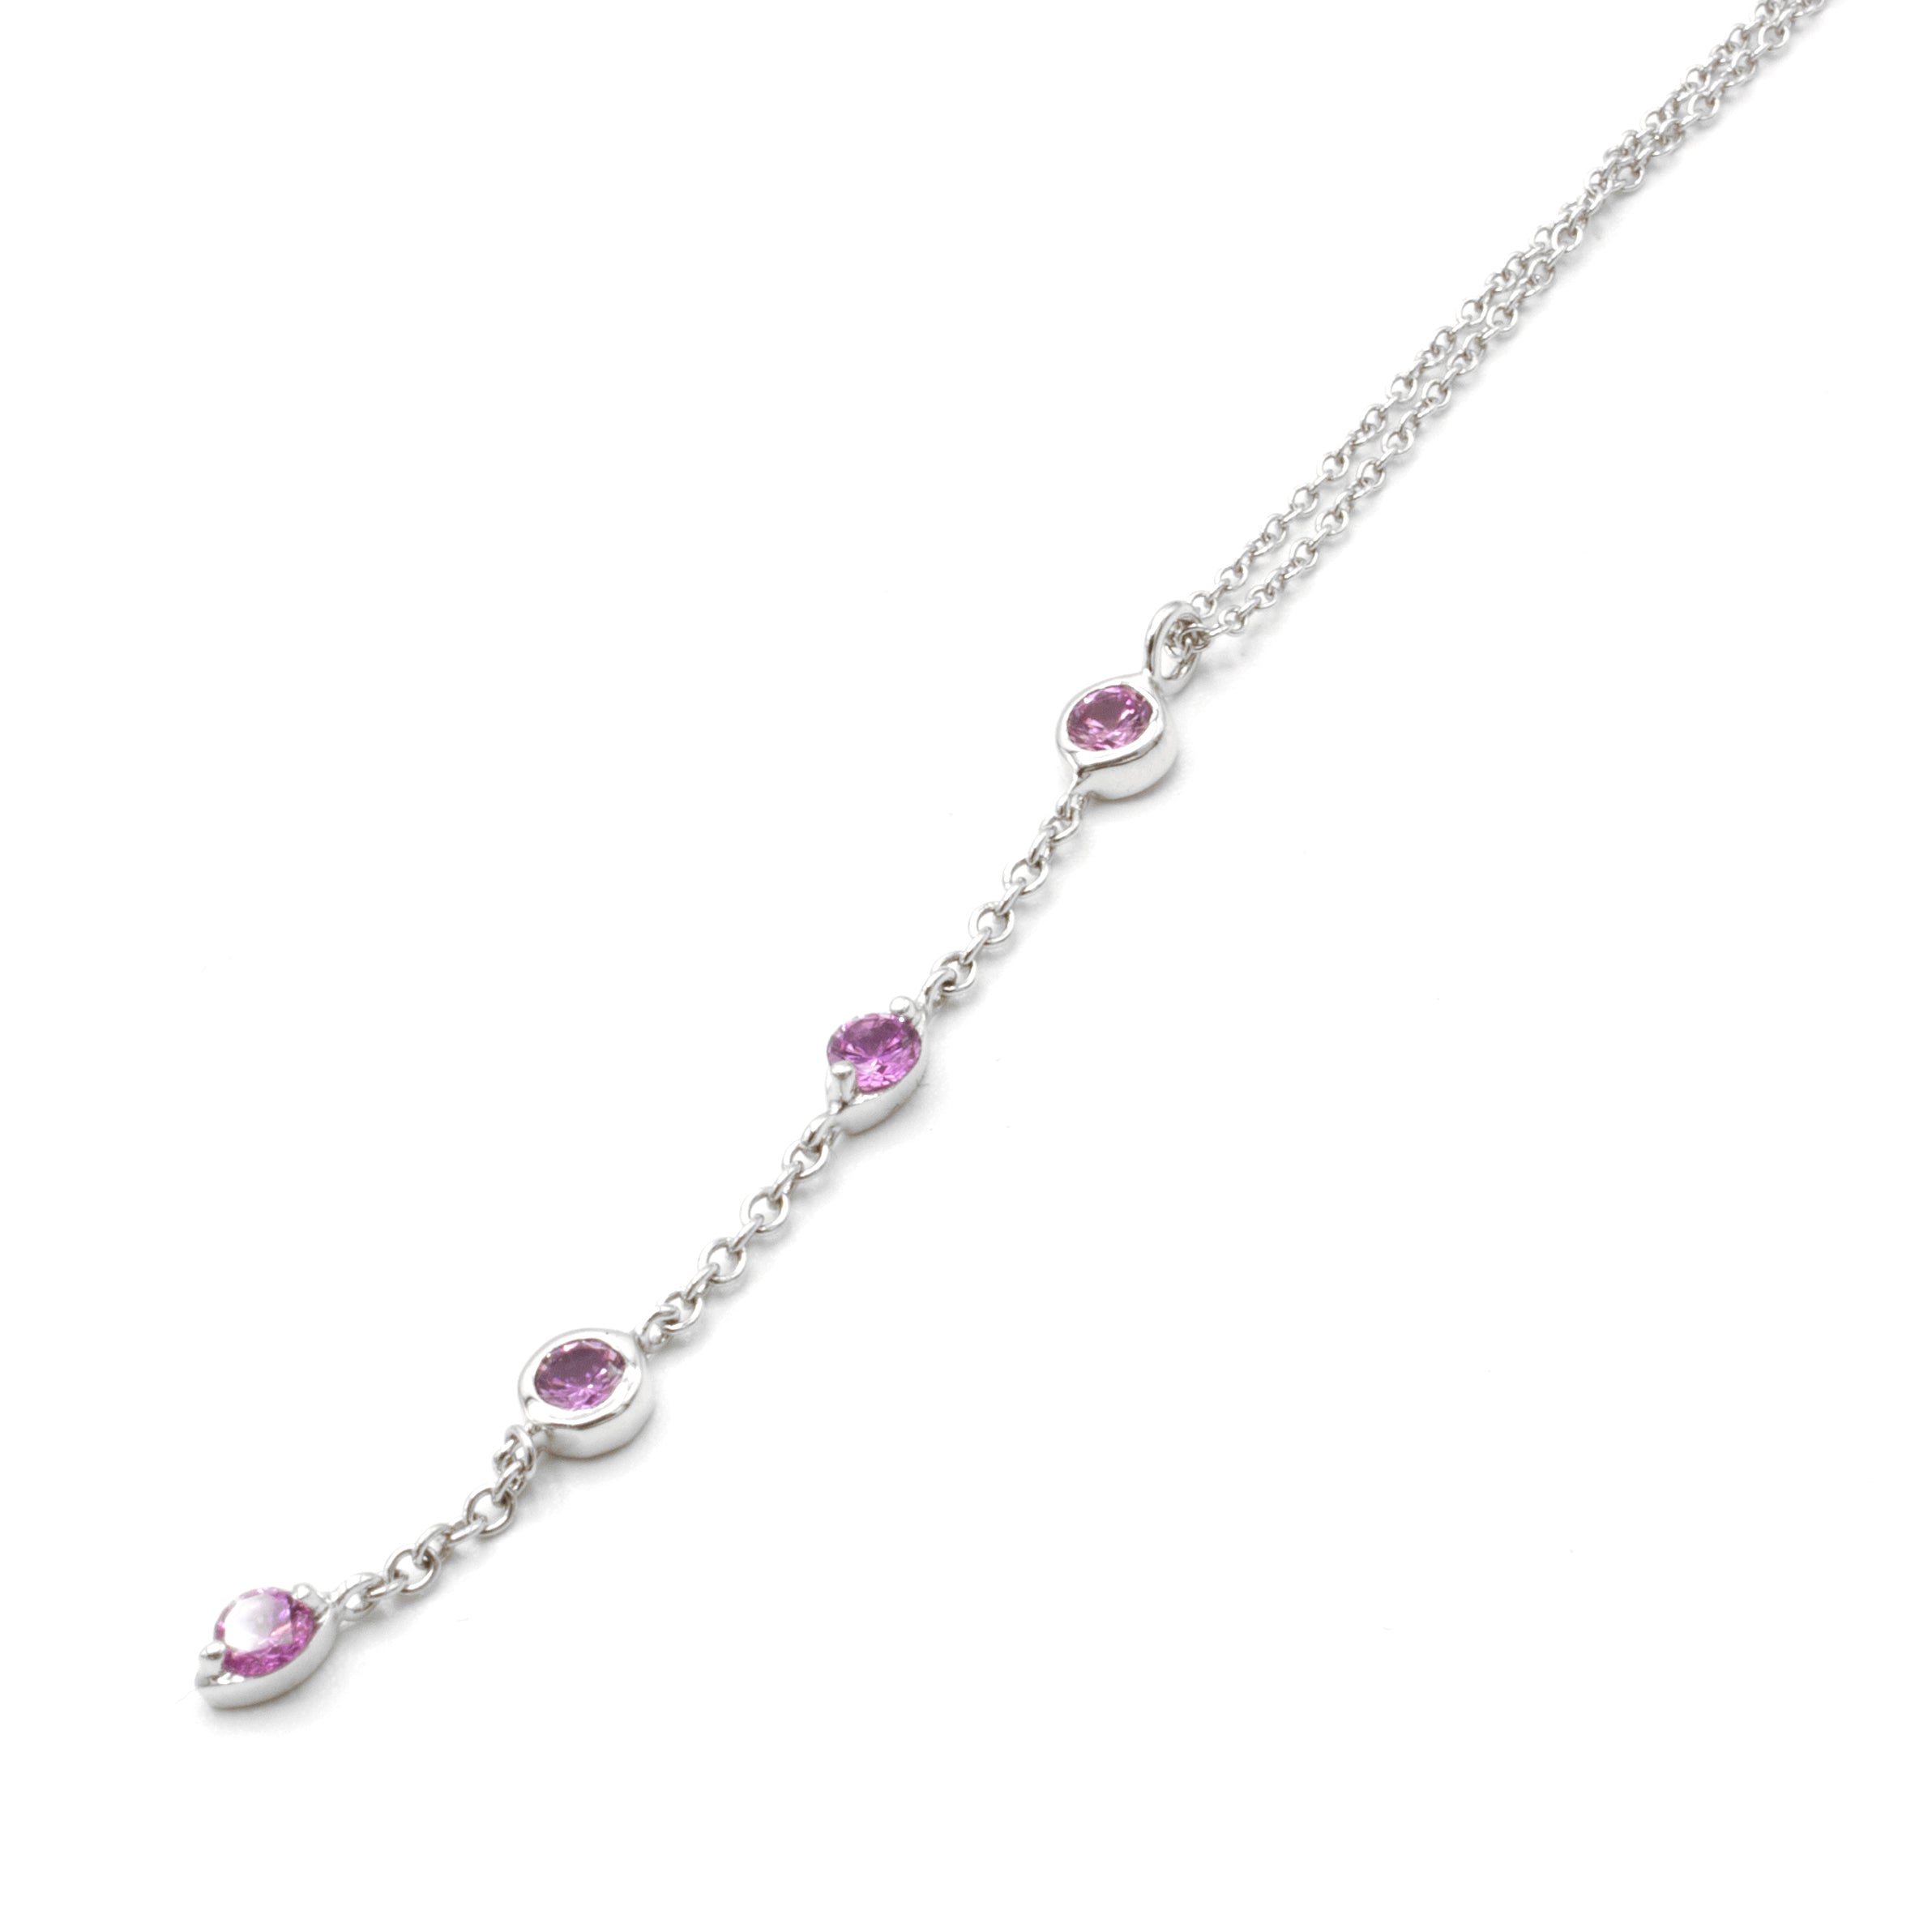 GIFT* Tiffany & Co. Pink Sapphire Open Heart Necklace 16